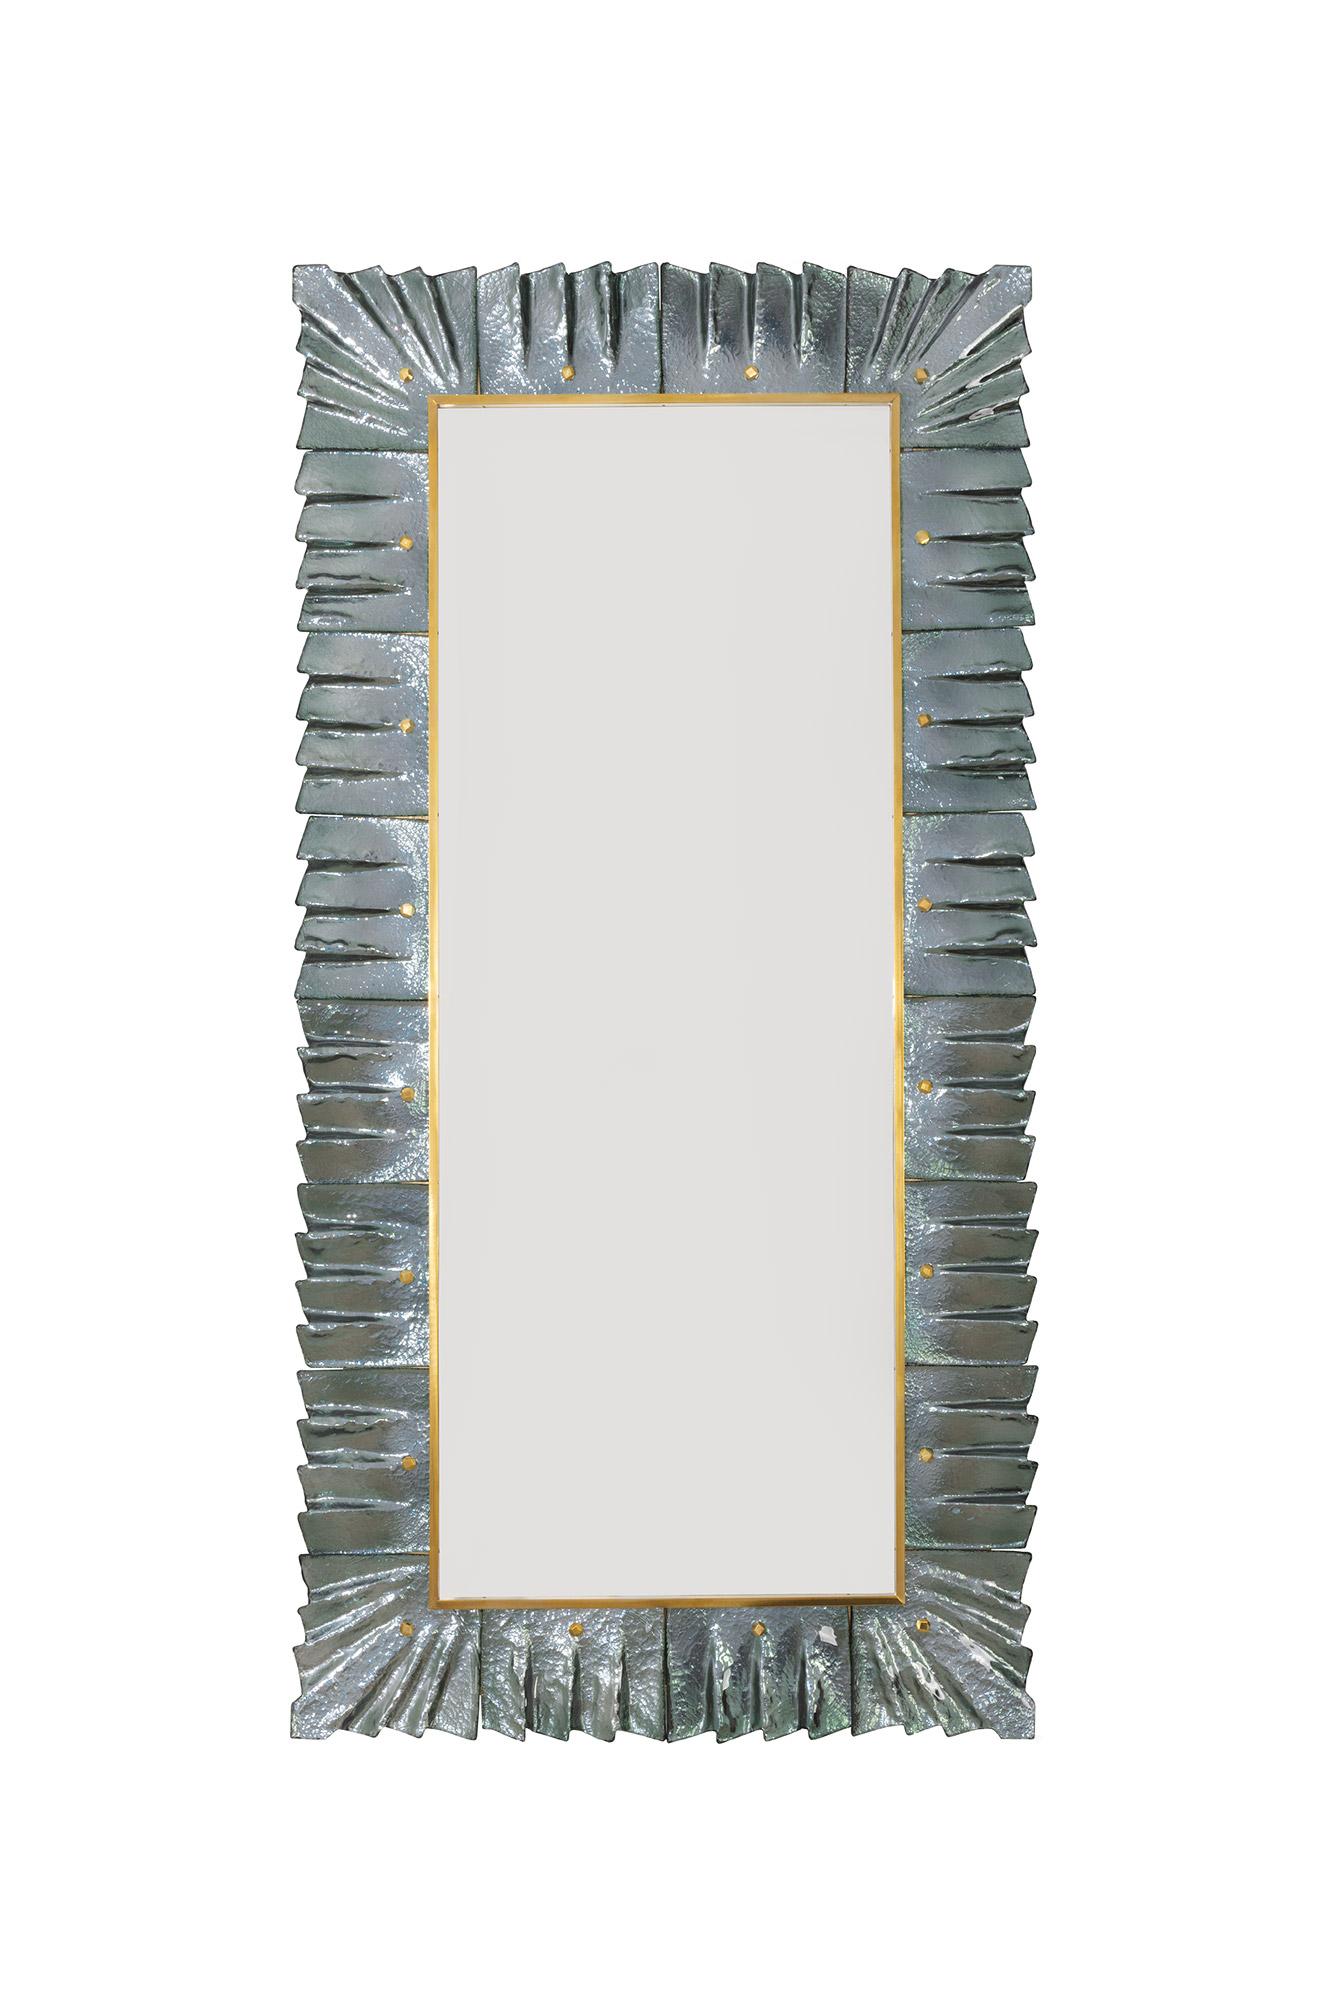  Large rectangular Murano sea green Glass framed mirror , in stock
 Mirror plate surrounded with undulating glass tiles in sea green color held by brass cabochons.  Handcrafted by a team of artisans in Venice, Italy. 
 Can be easily hung vertically